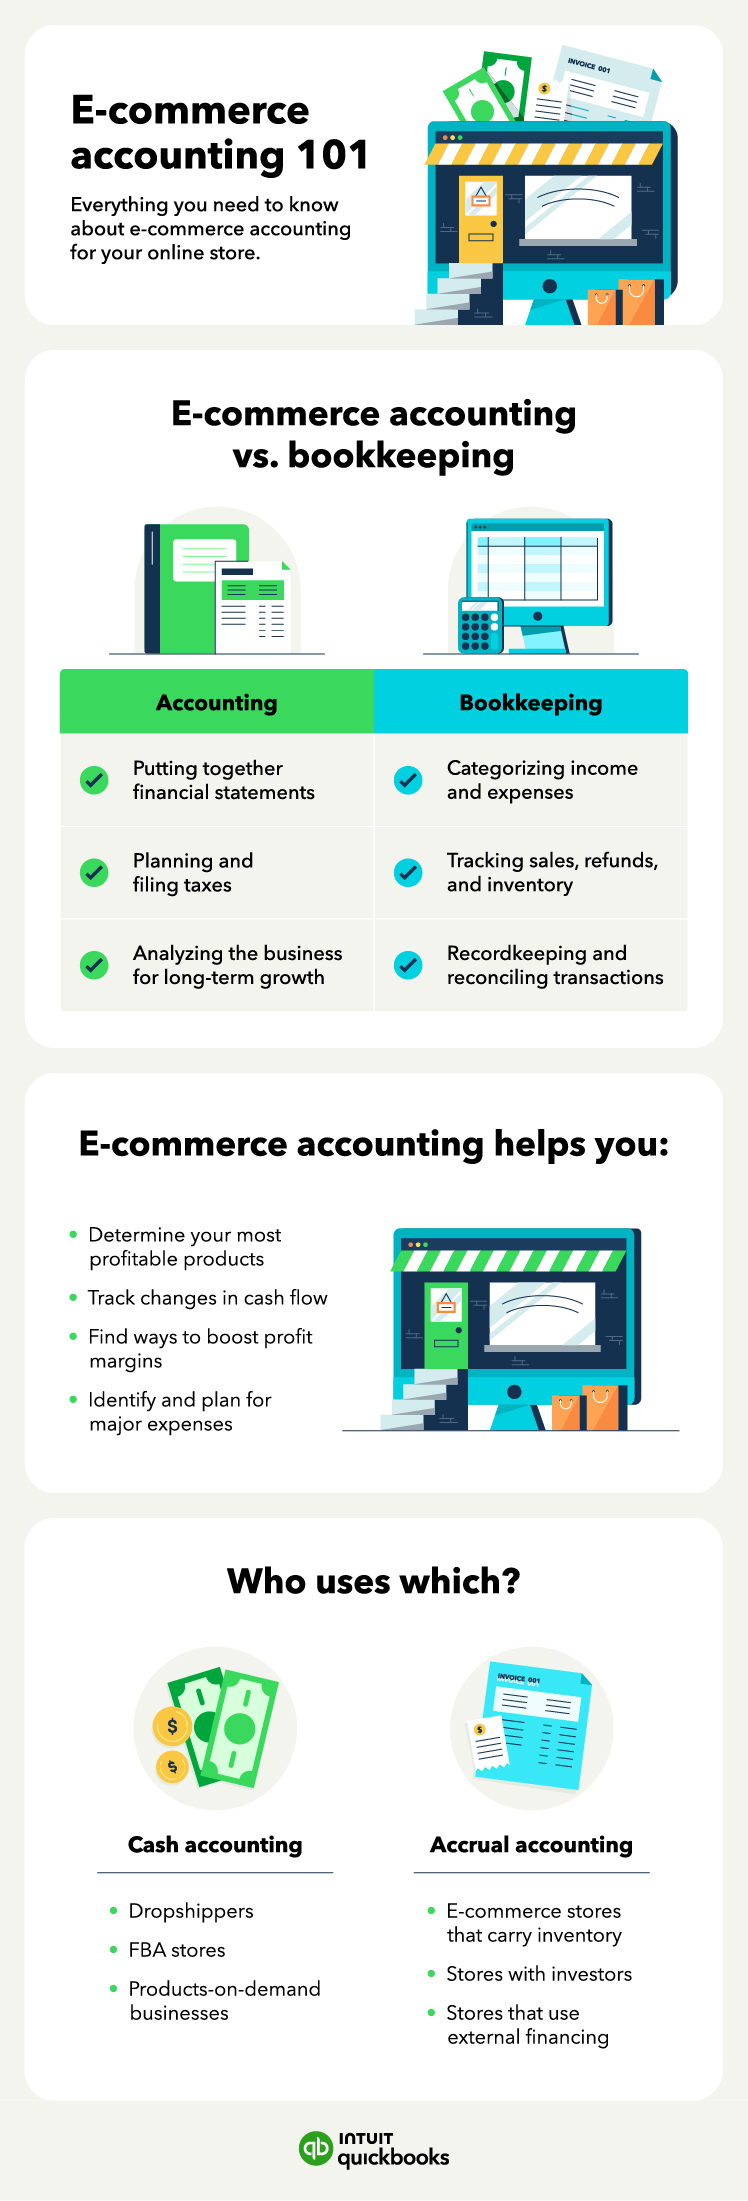 An illustration of e-commerce accounting 101: including e-commerce accounting vs. bookkeeping, how e-commerce accounting helps you, and which companies use e-commerce accounting.